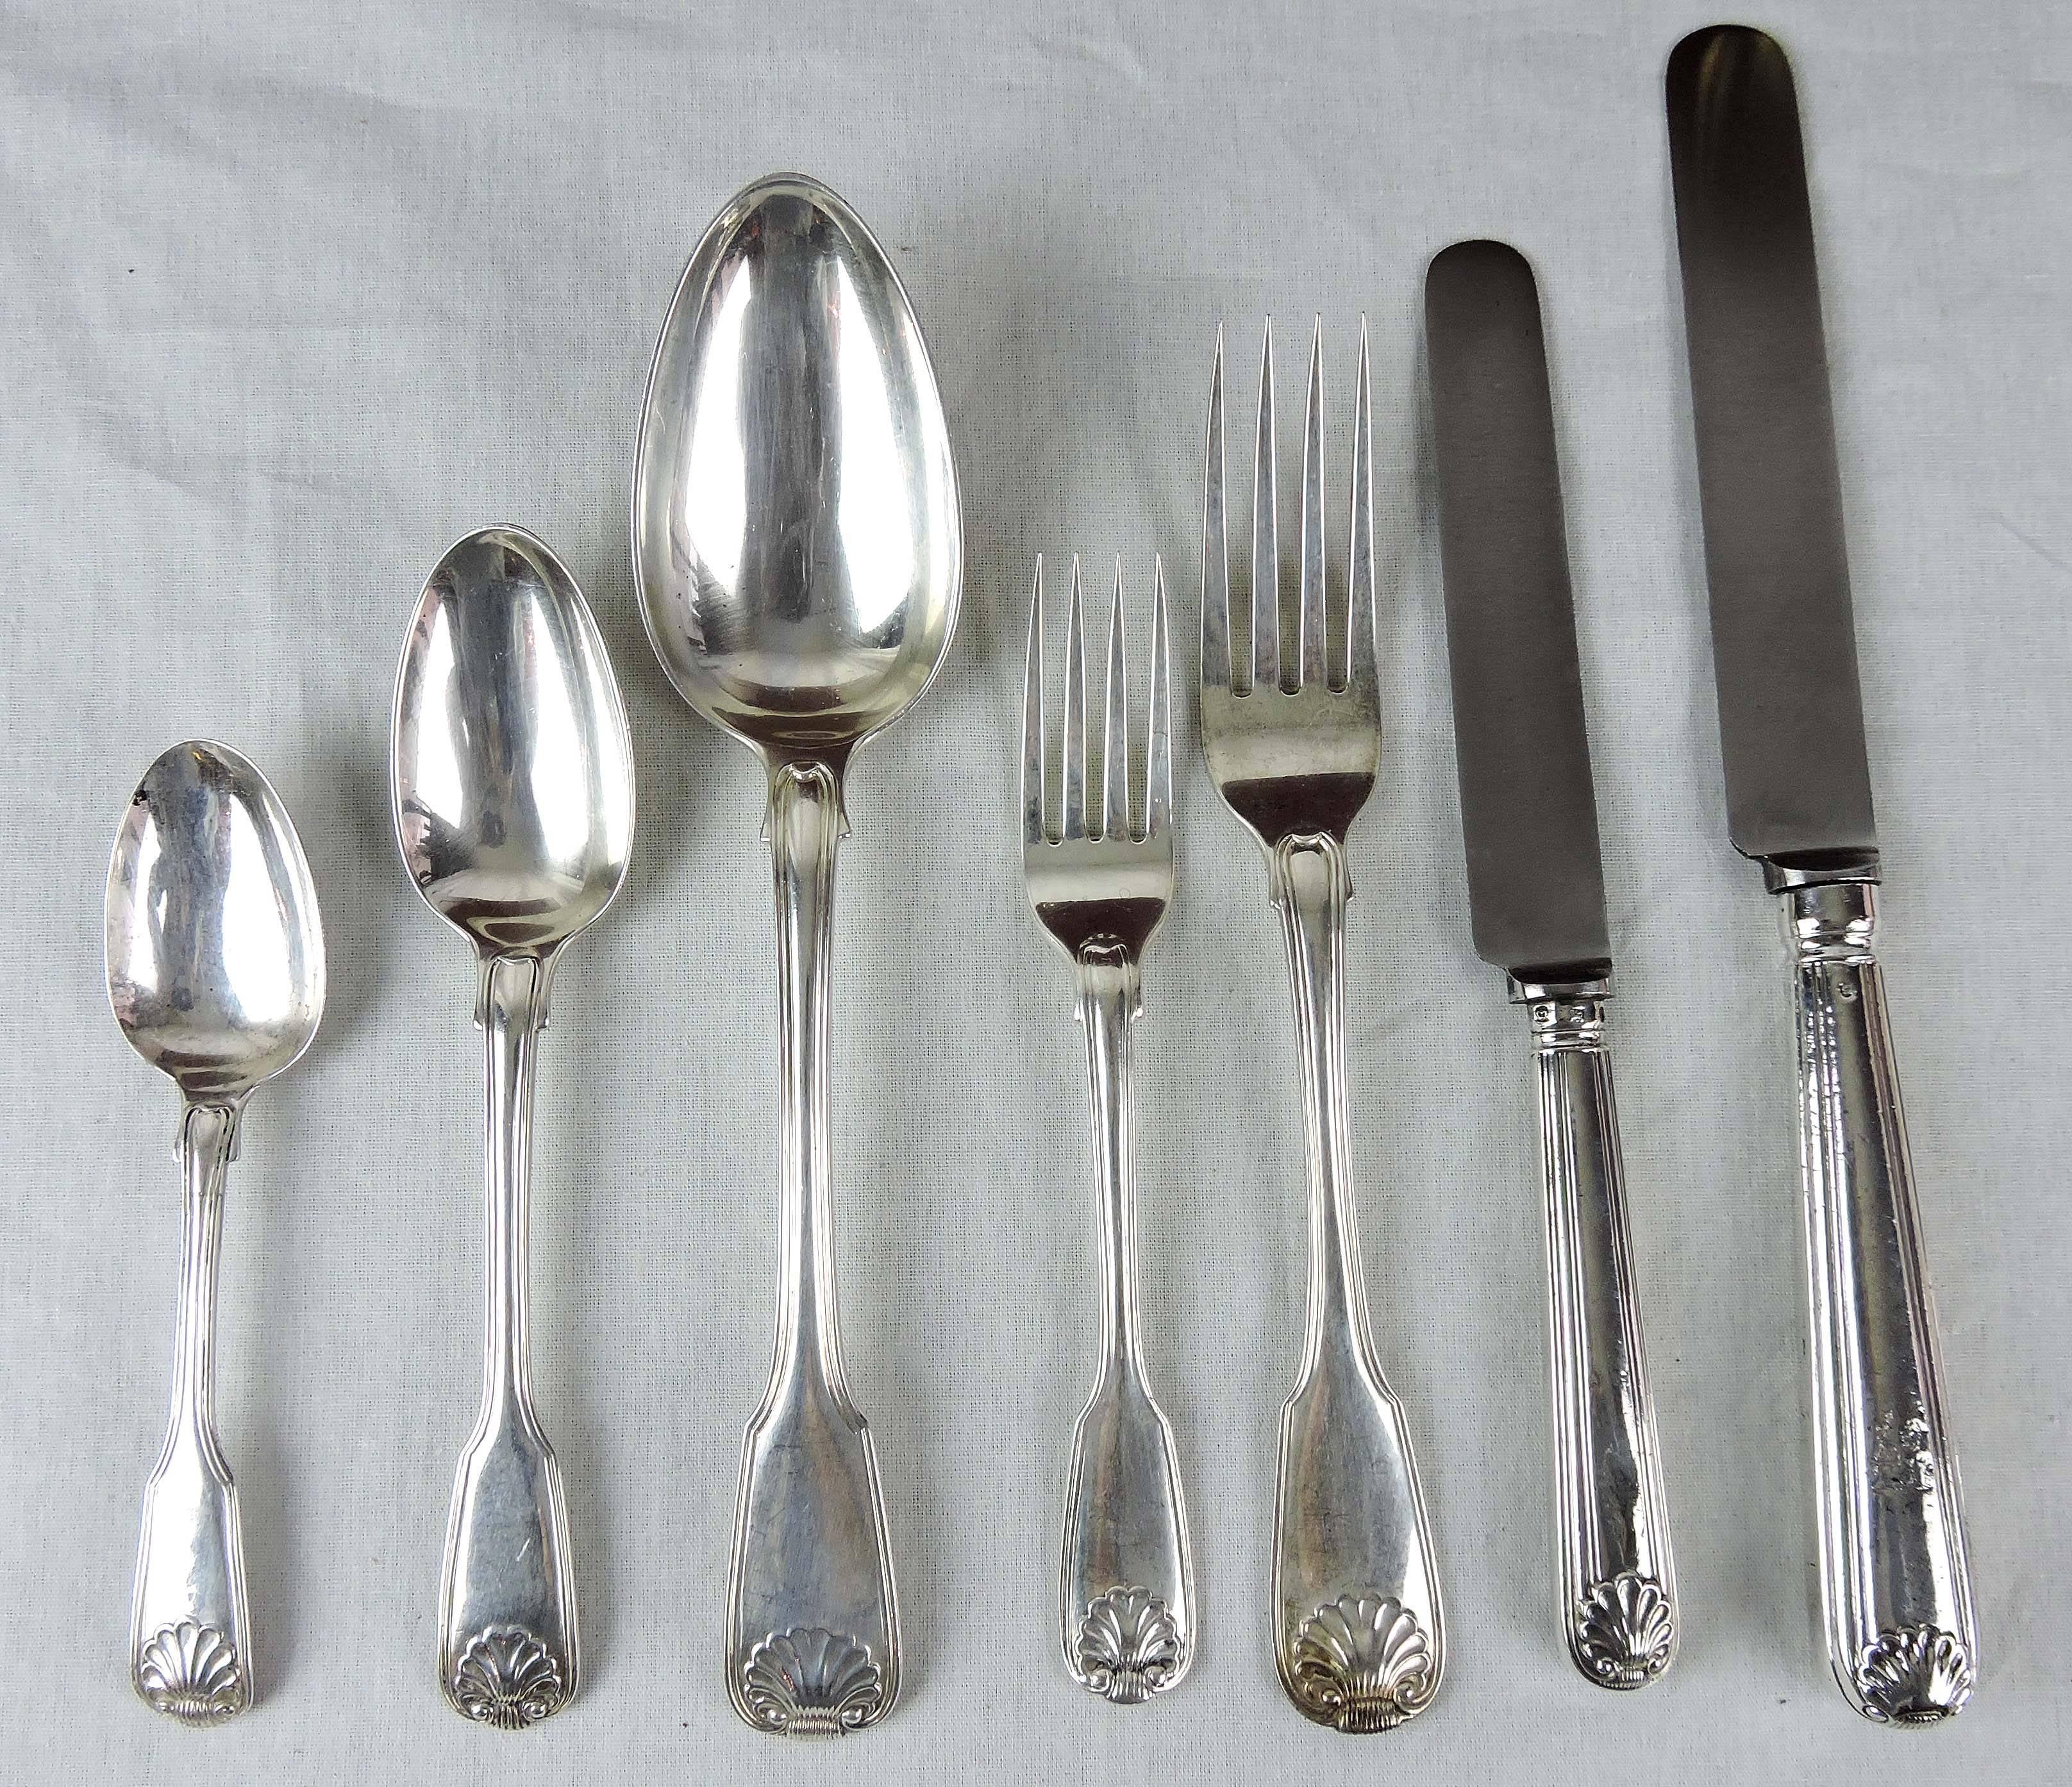 This double-struck flatware service in fiddle, shell and thread pattern was variously made by William Eley, William Fearn and William Chawner I & II in London between 1809 and 1832, with the exception of the knives which were made in Sheffield by